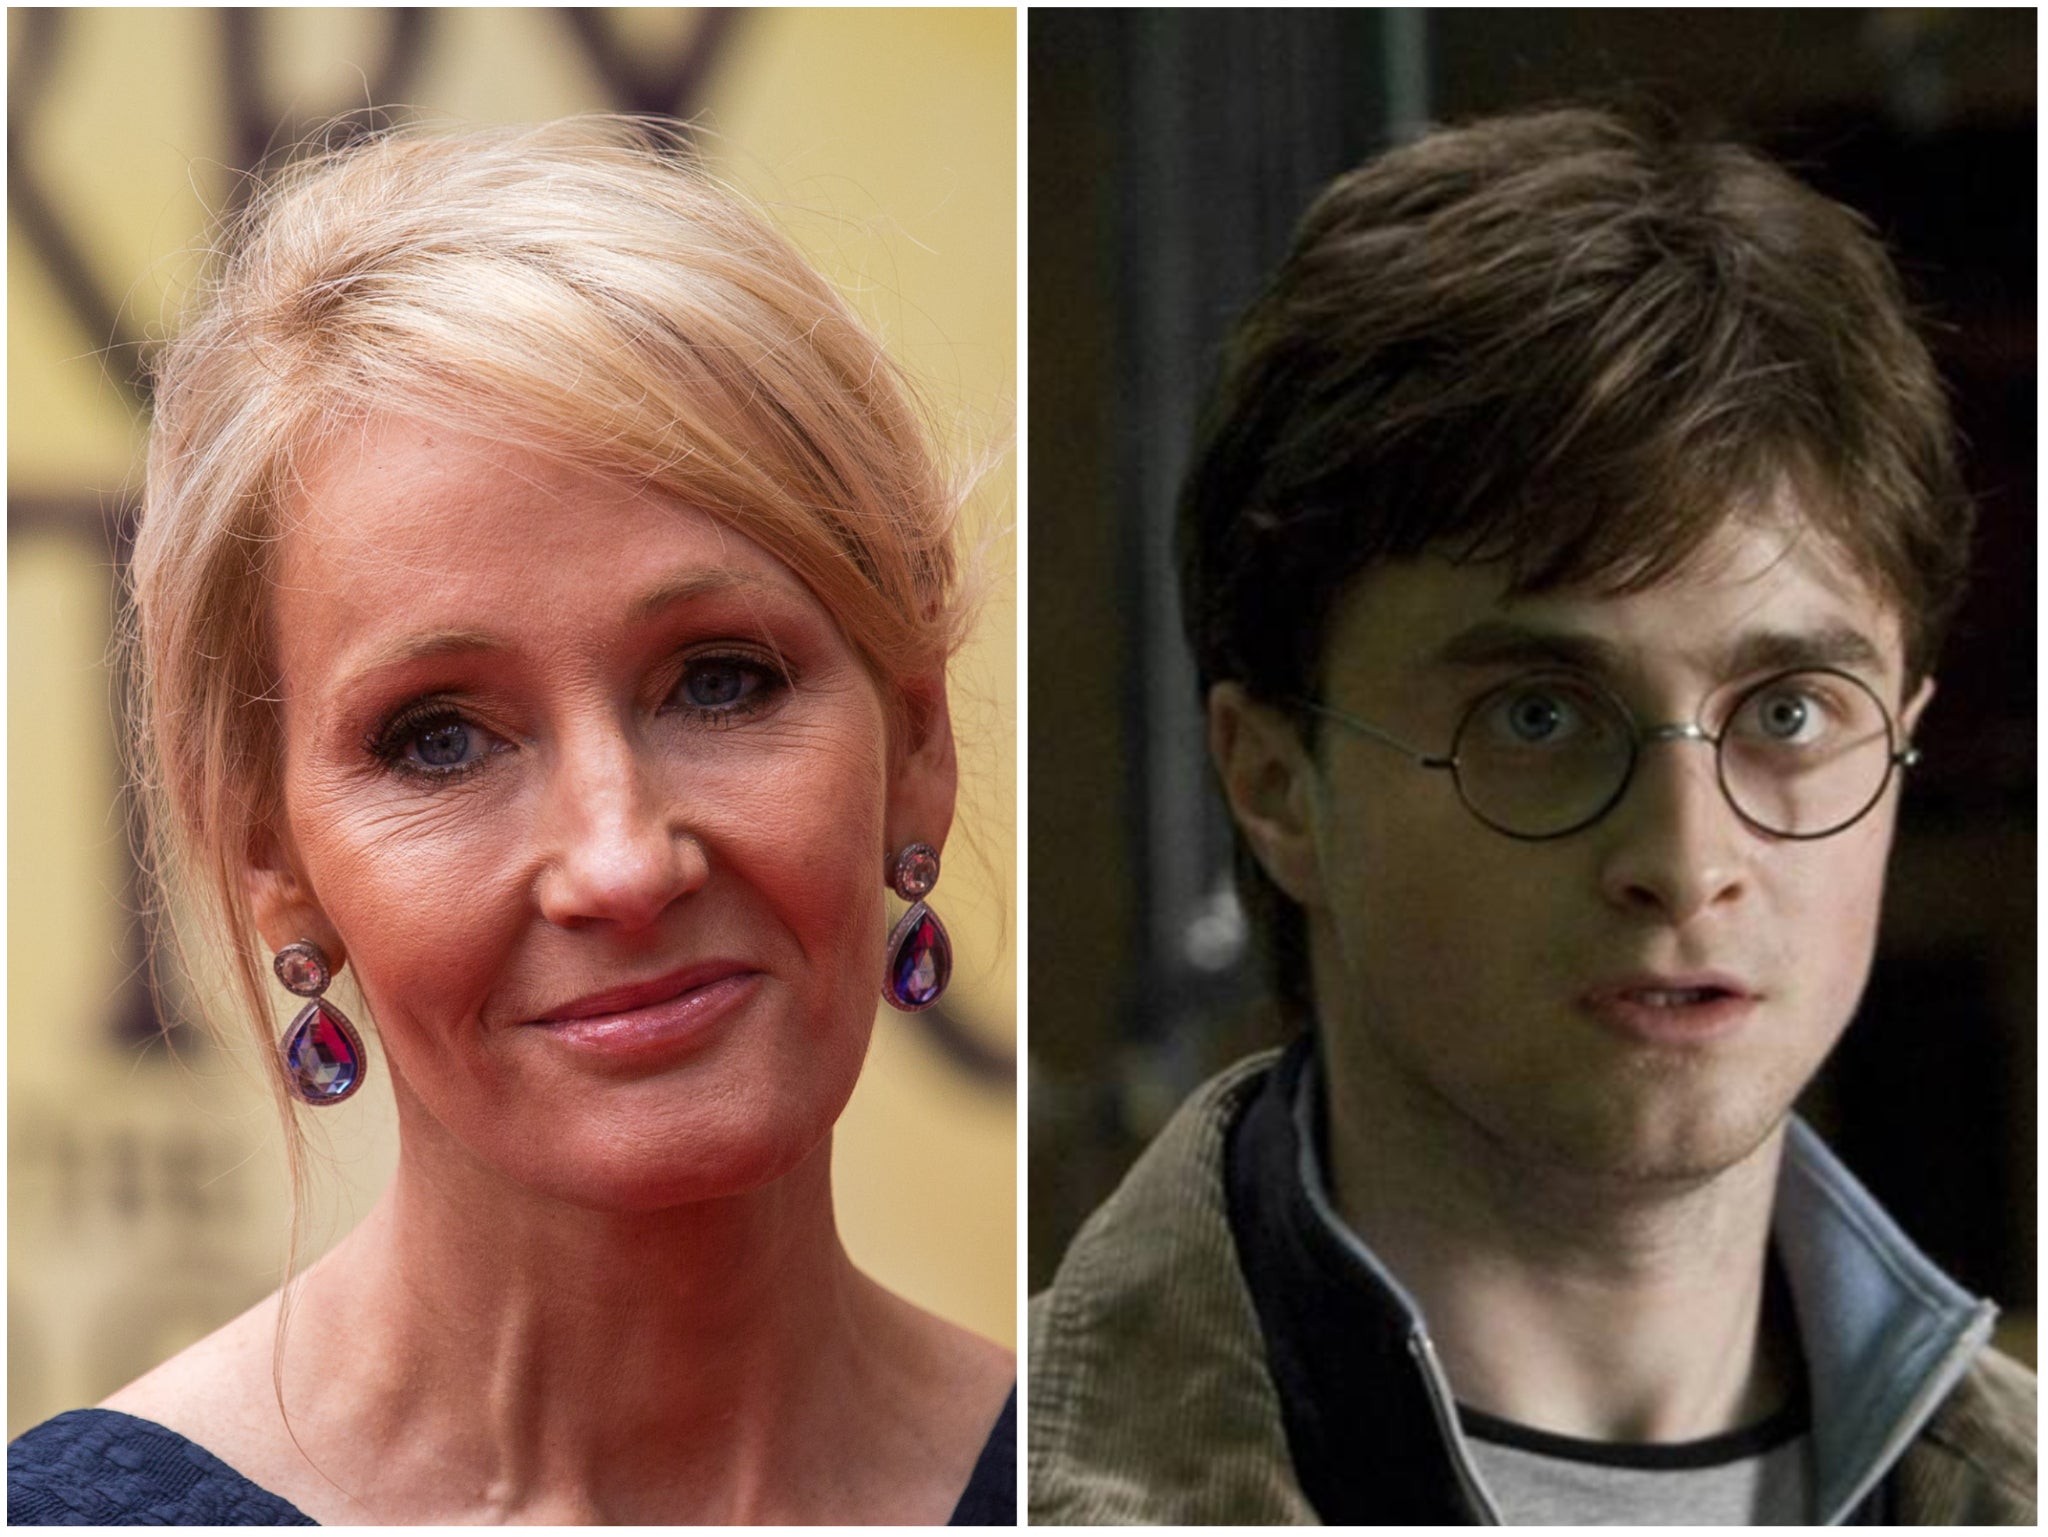 JK Rowling and Daniel Radcliffe as Harry Potter